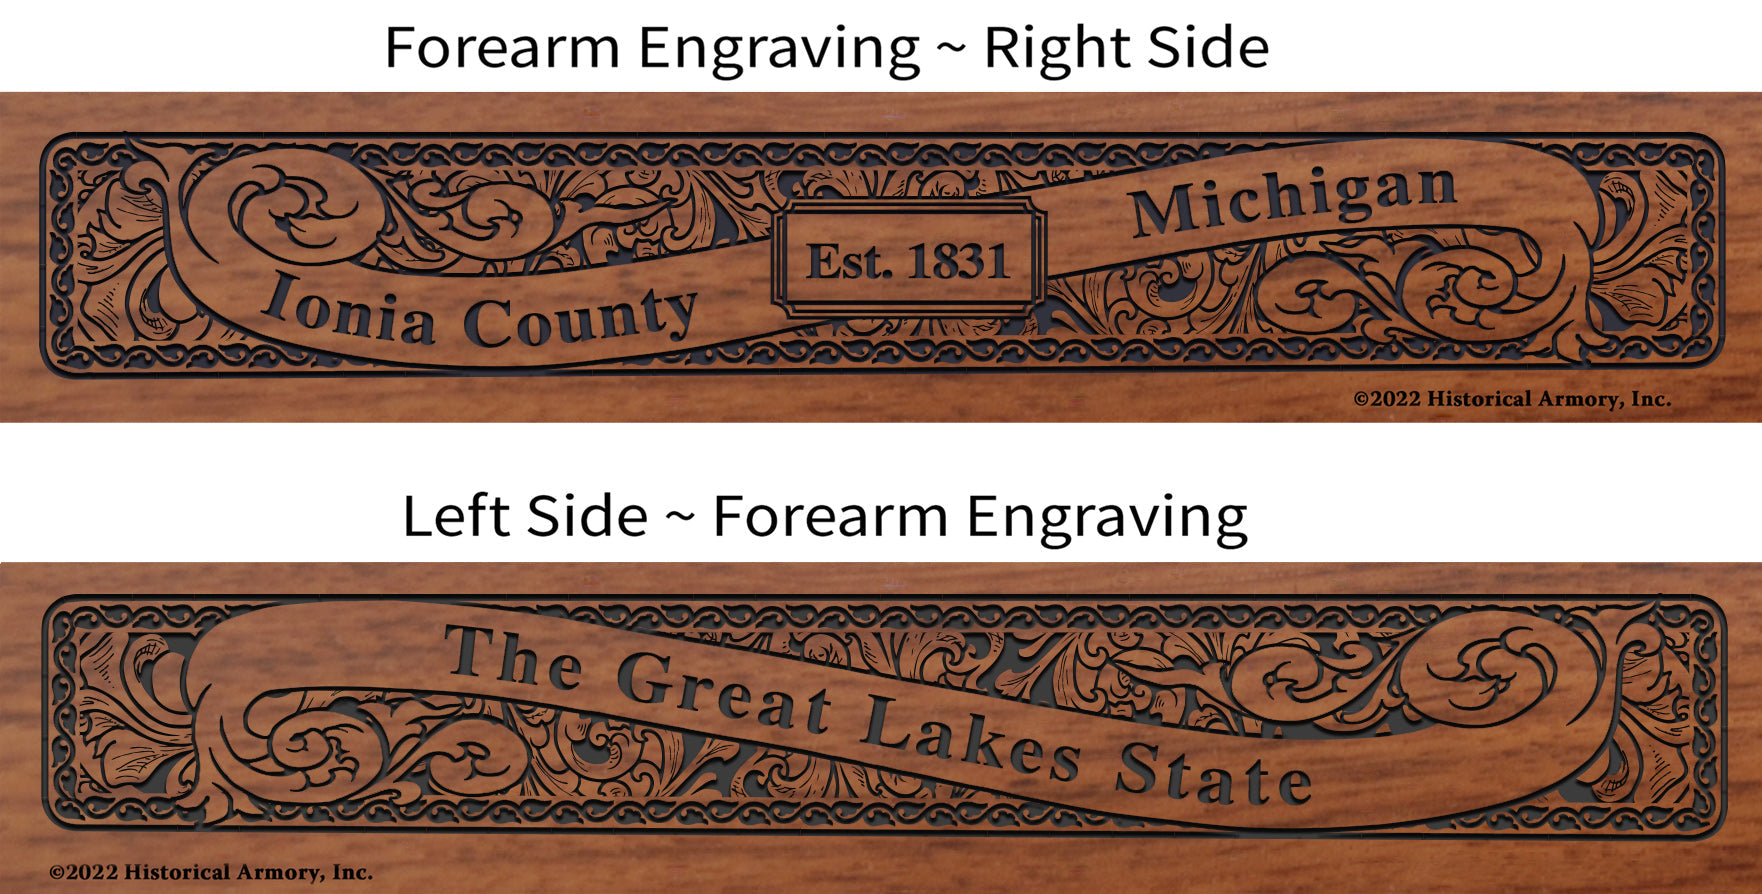 Ionia County Michigan Engraved Rifle Forearm